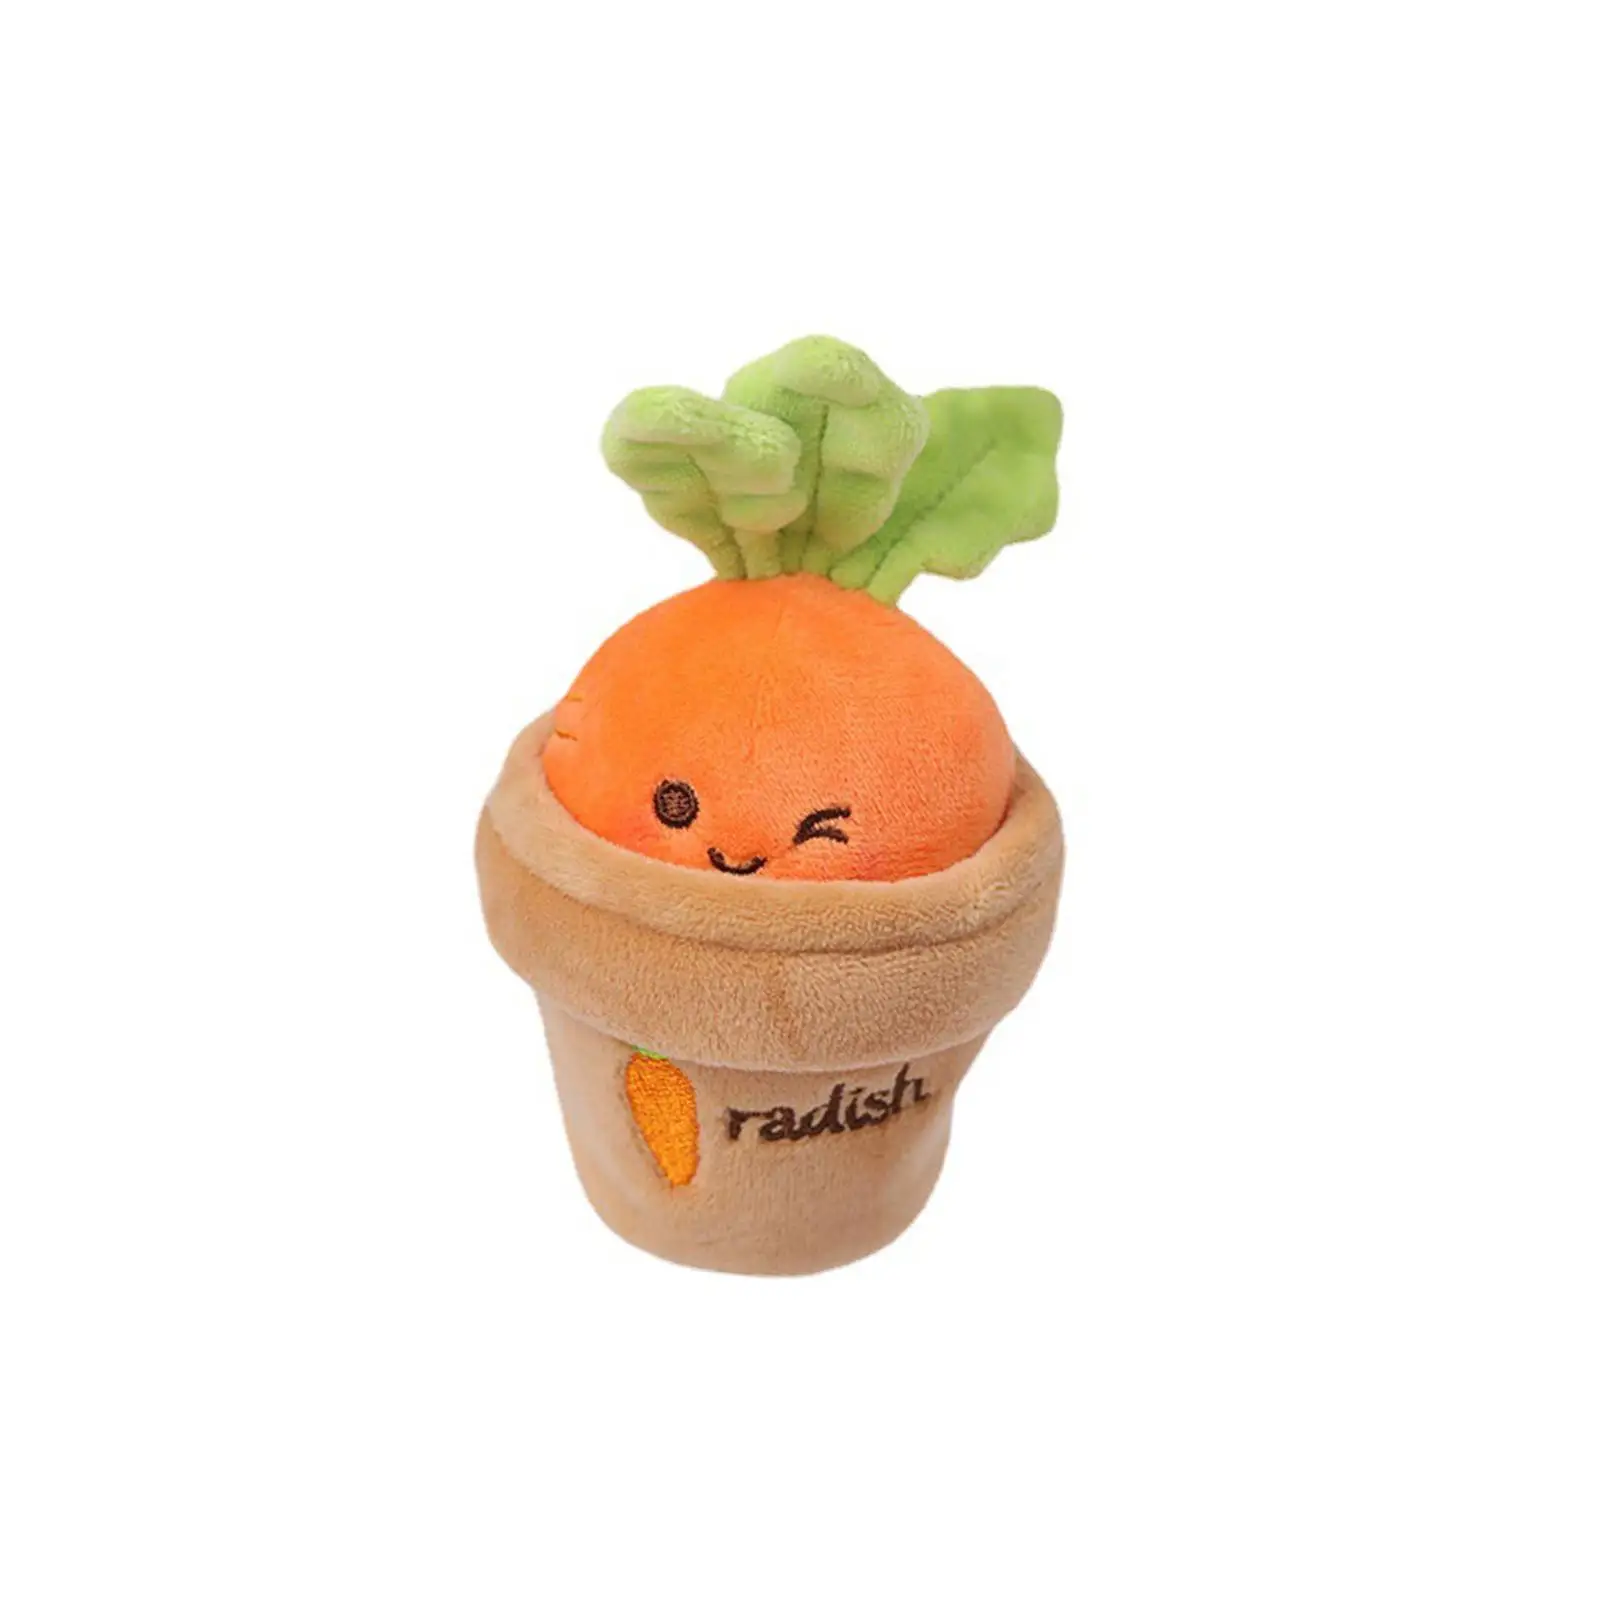 Carrot Plush Toy Keyrings Soft Pulling Radish Doll Toy Stuffed for Room Home